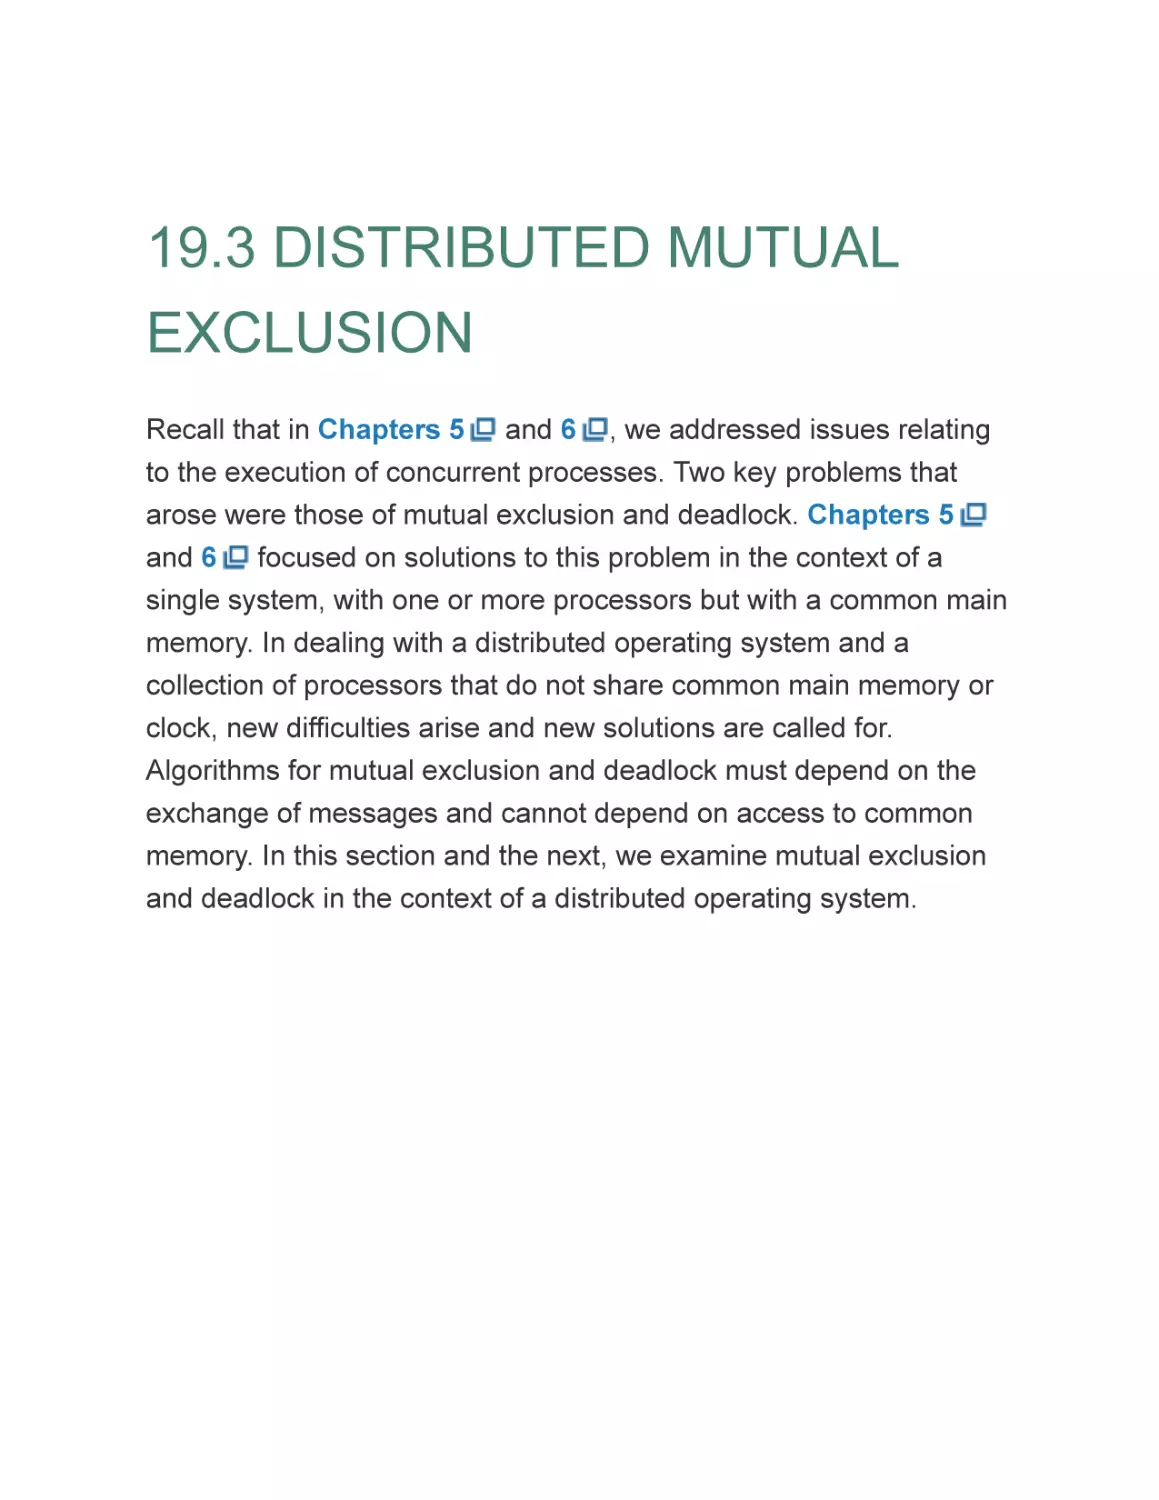 19.3 DISTRIBUTED MUTUAL EXCLUSION